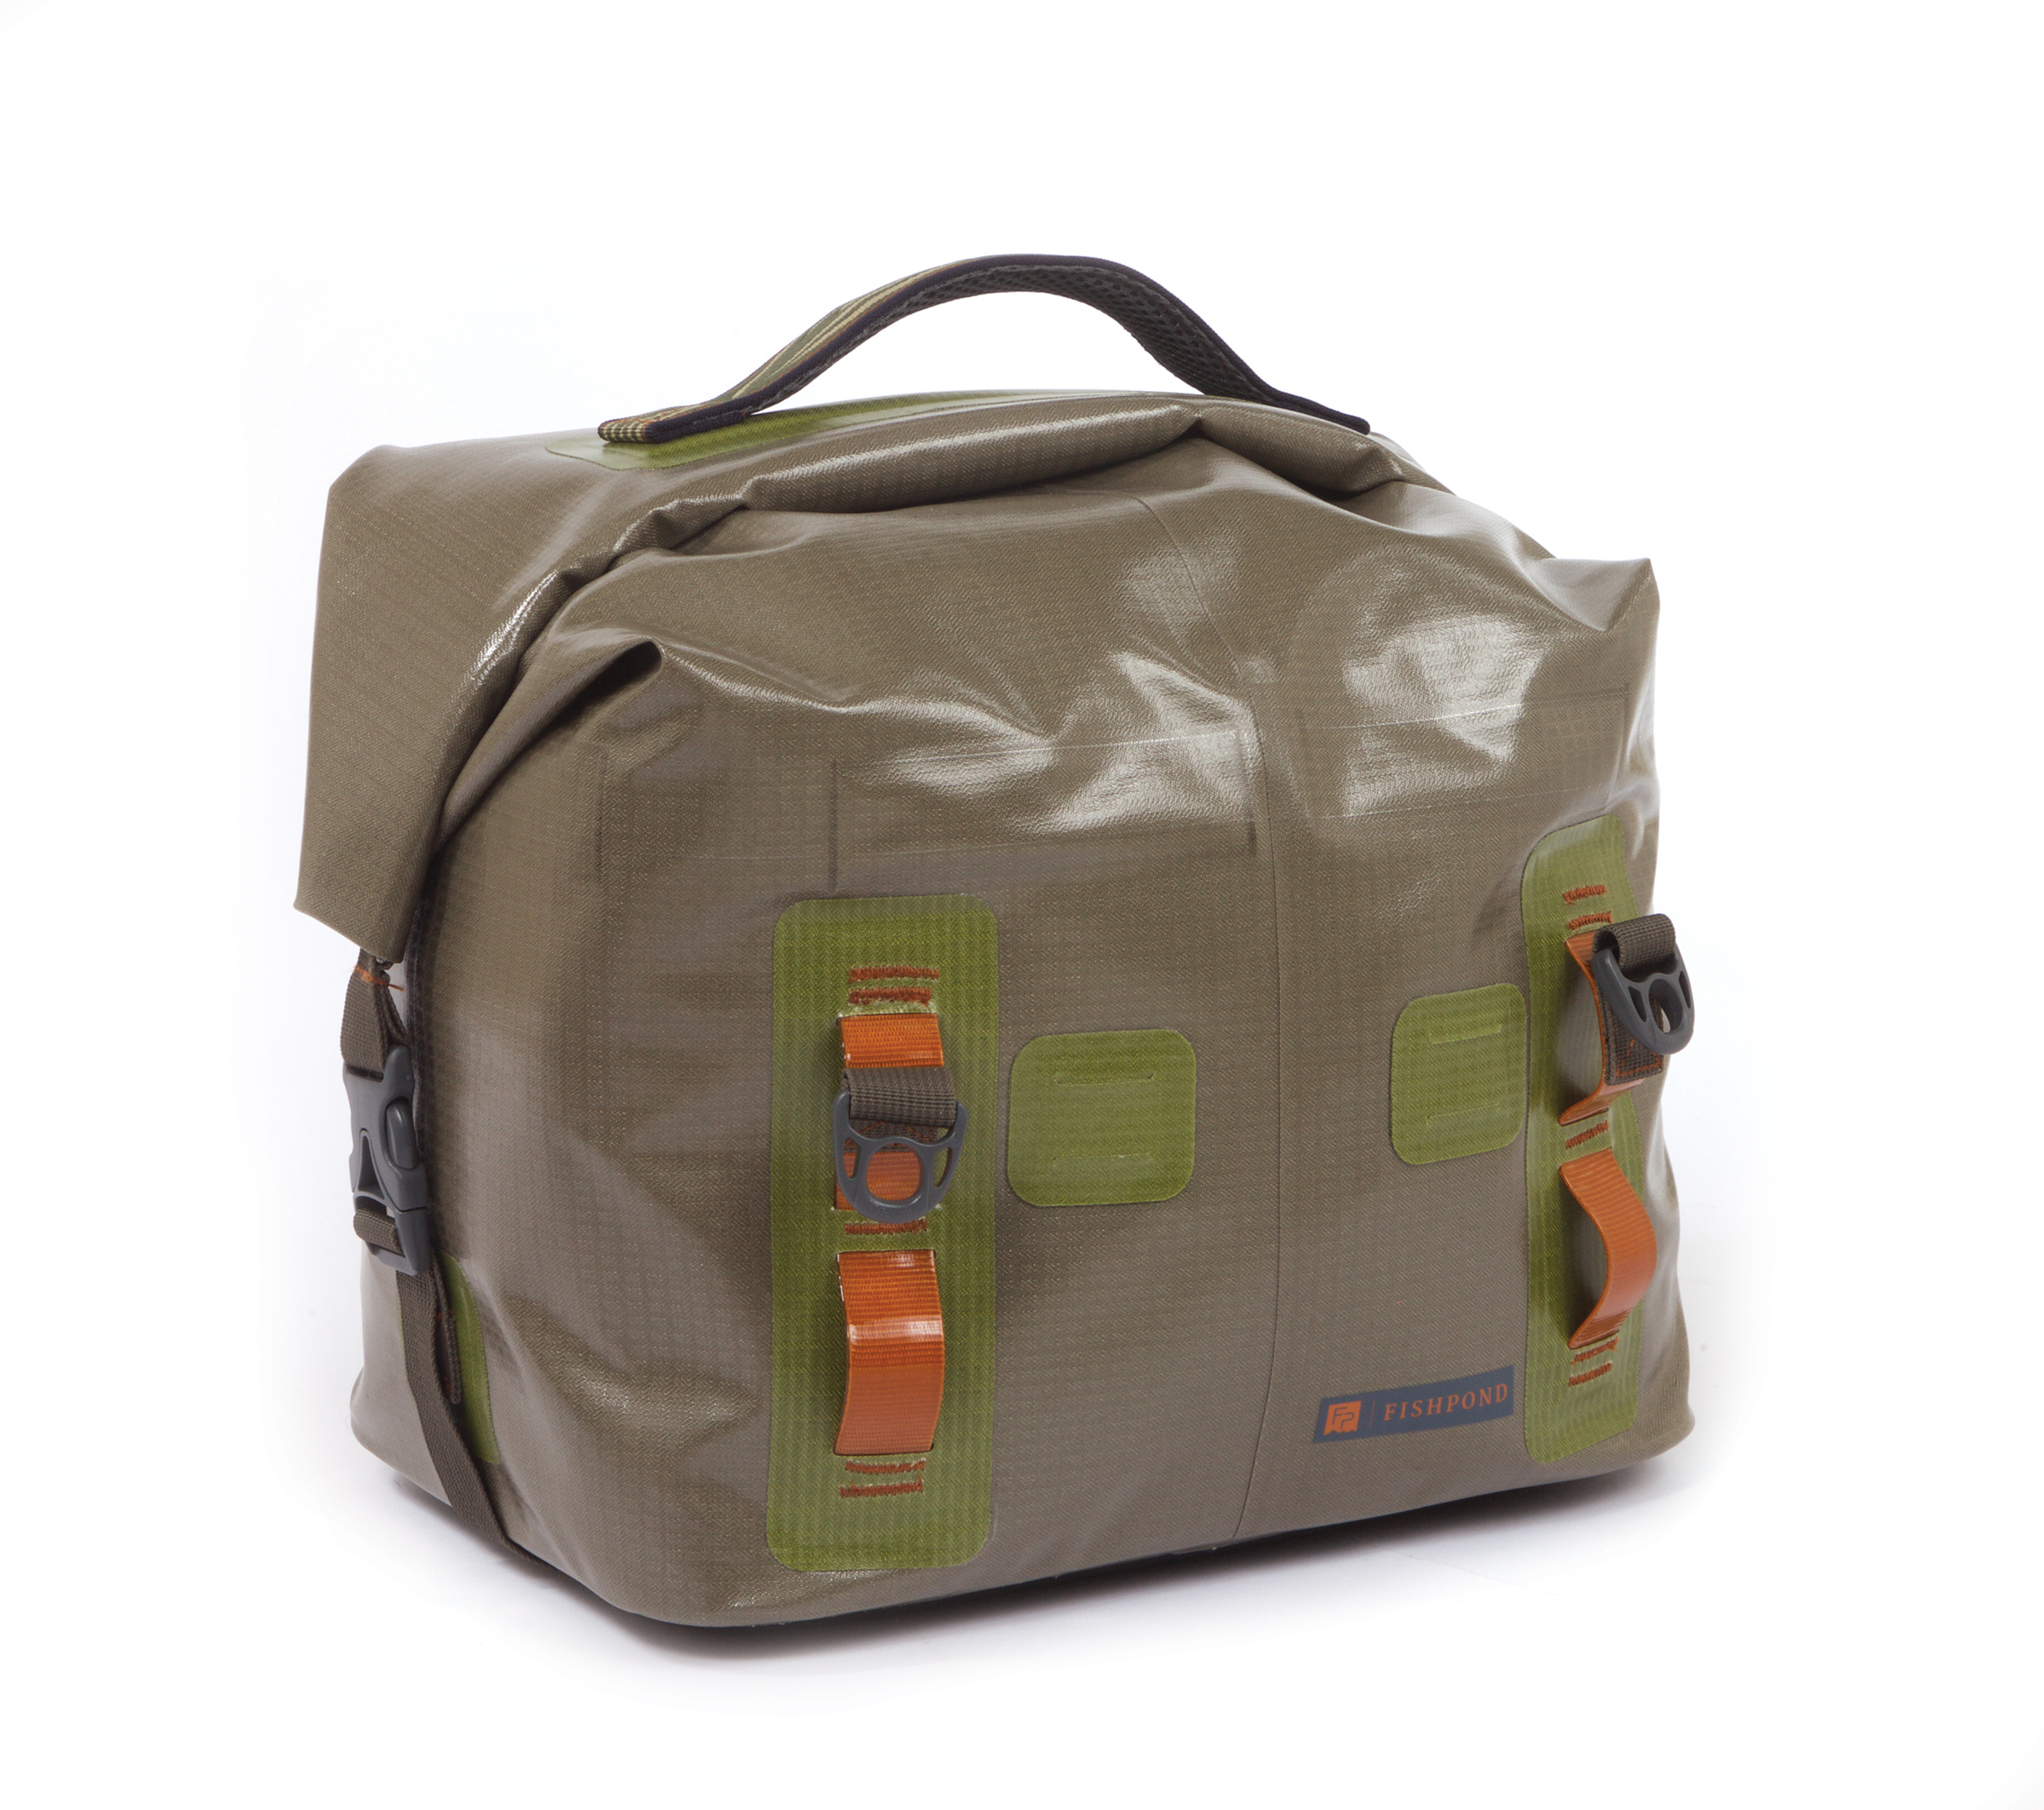 Fly Fishing Gear Review  Boat Bags 